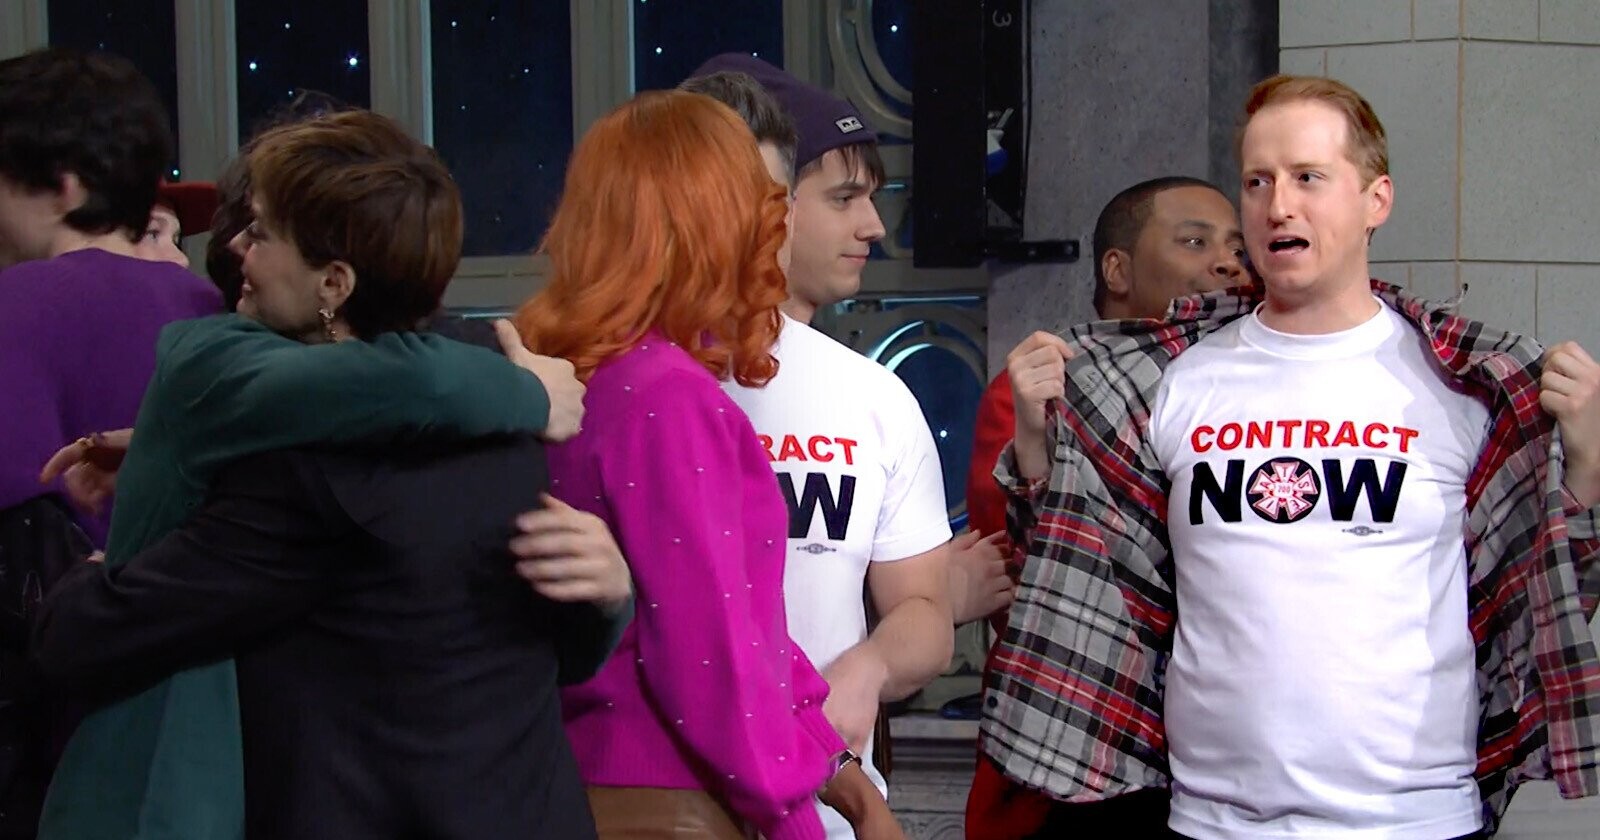 This Isn’t the First Time ‘Saturday Night Live’ Hasn’t Wanted to Pay Its Workers